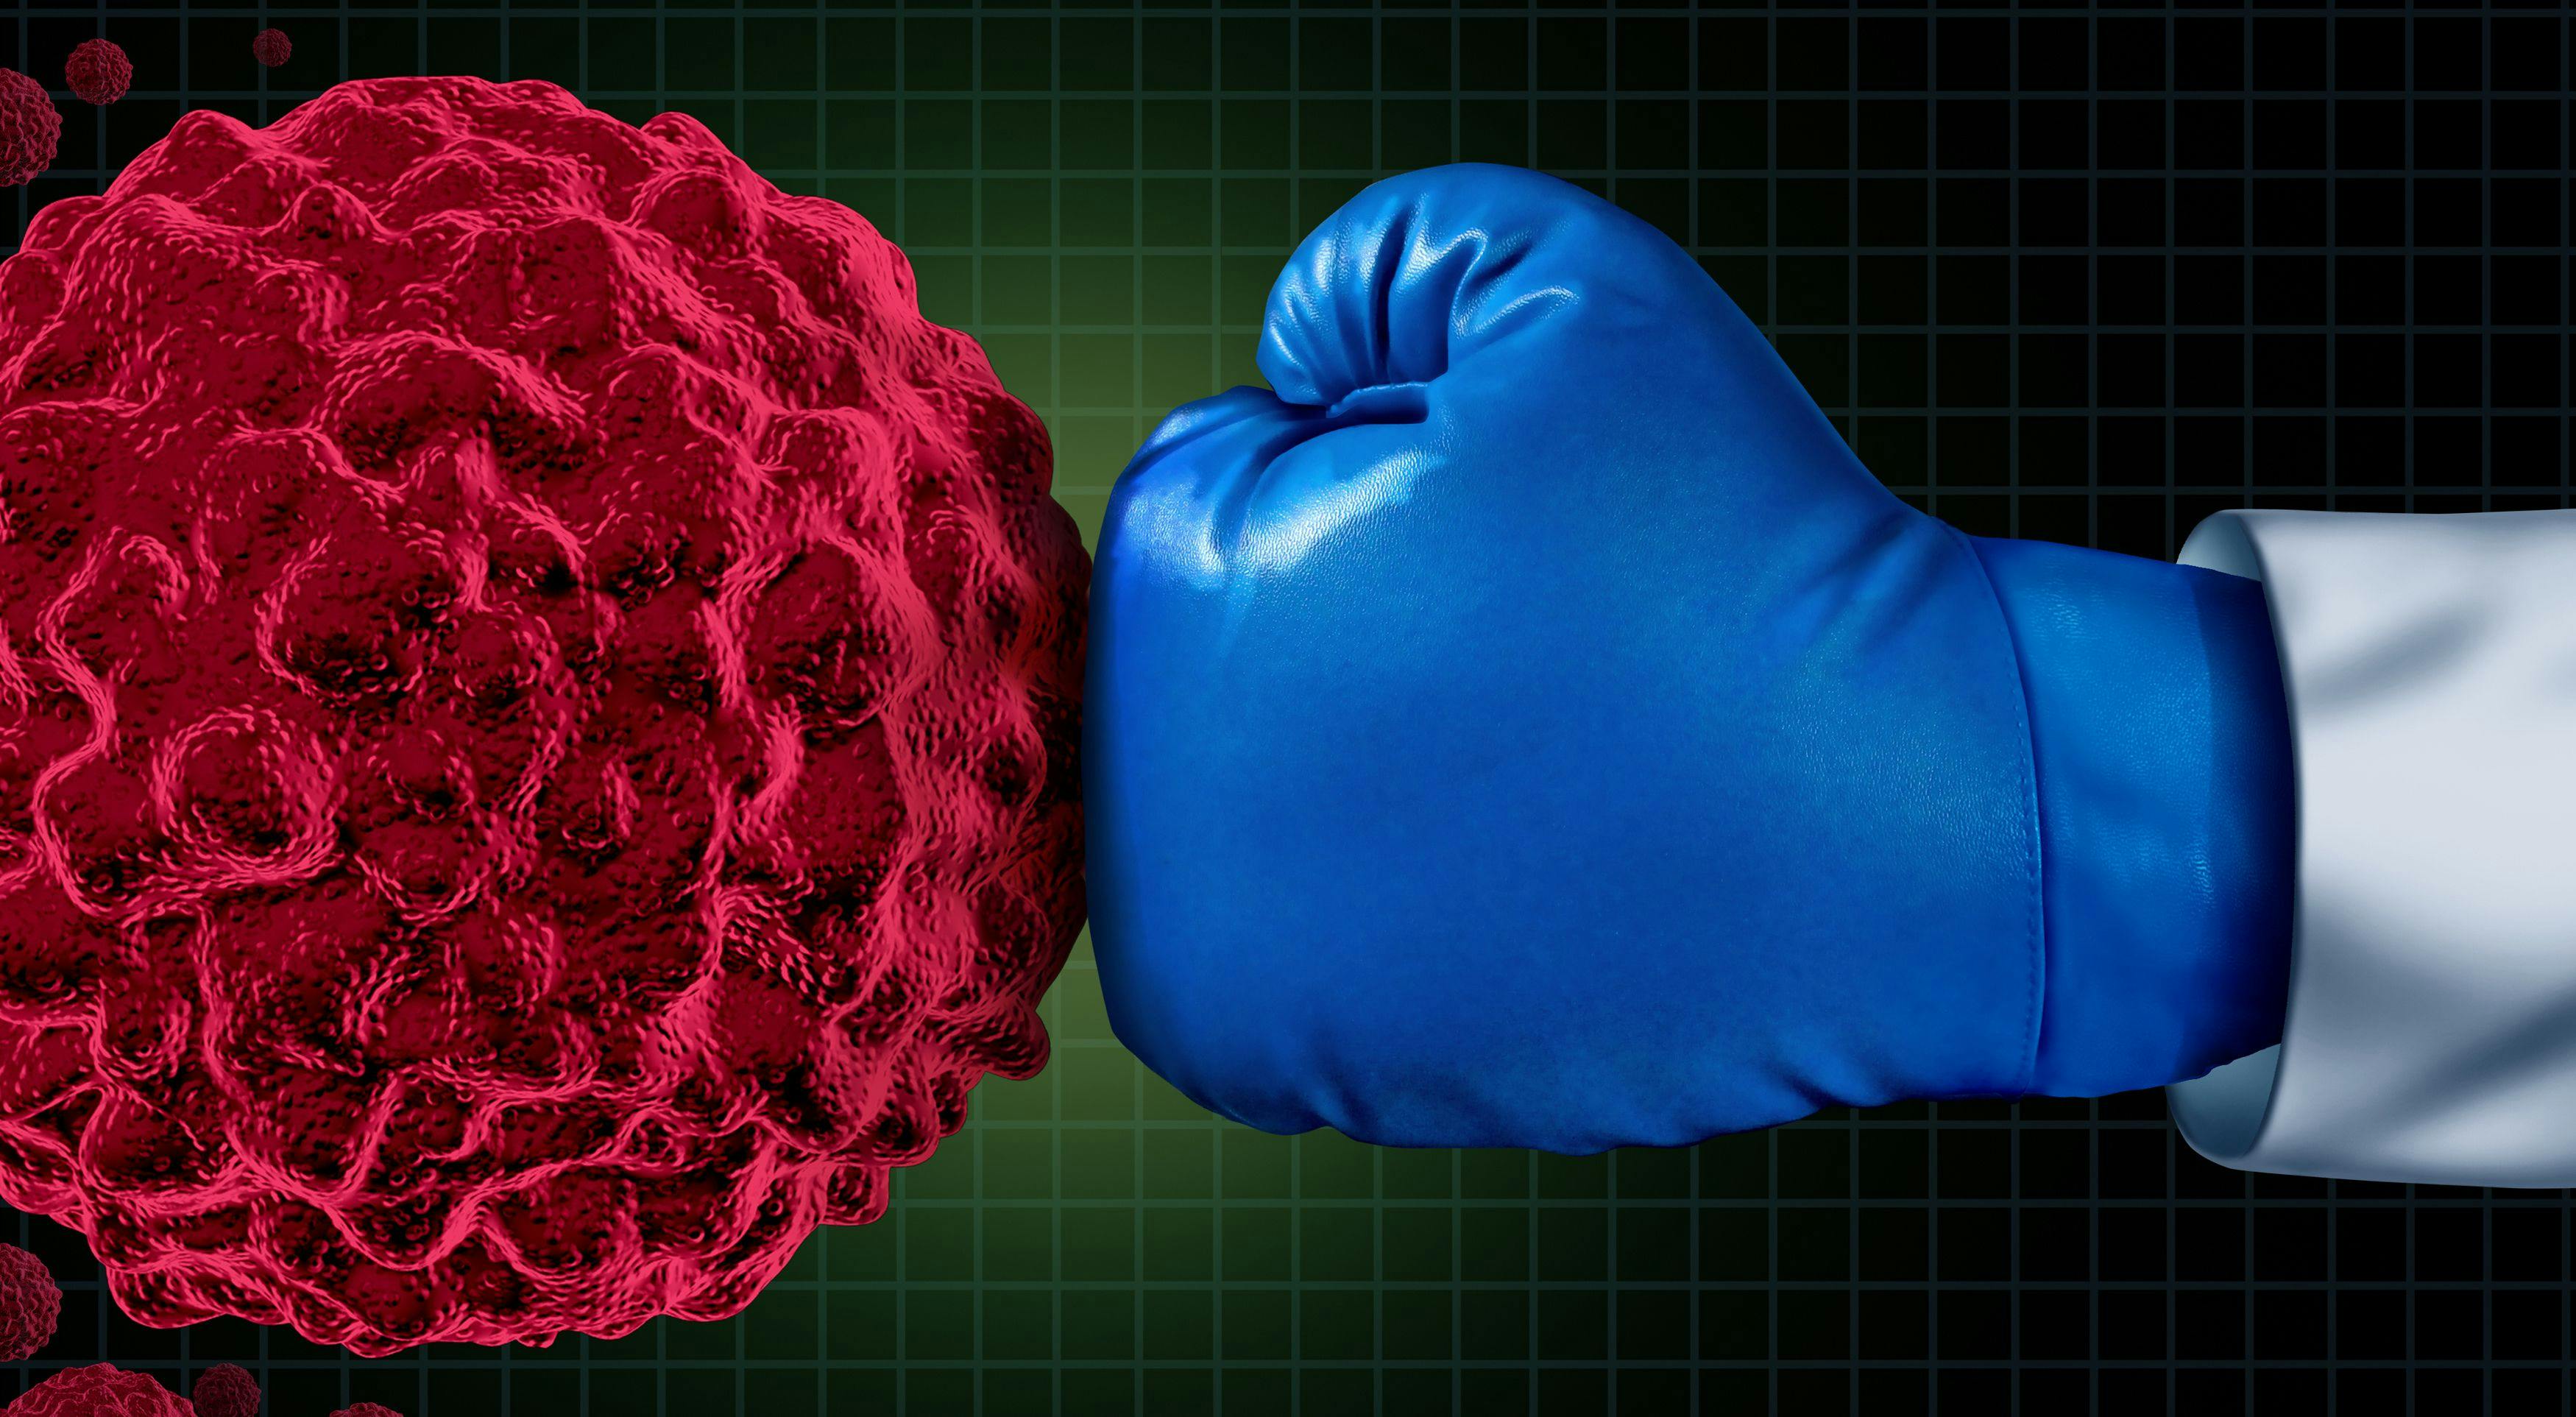 image of a glove hitting cancer